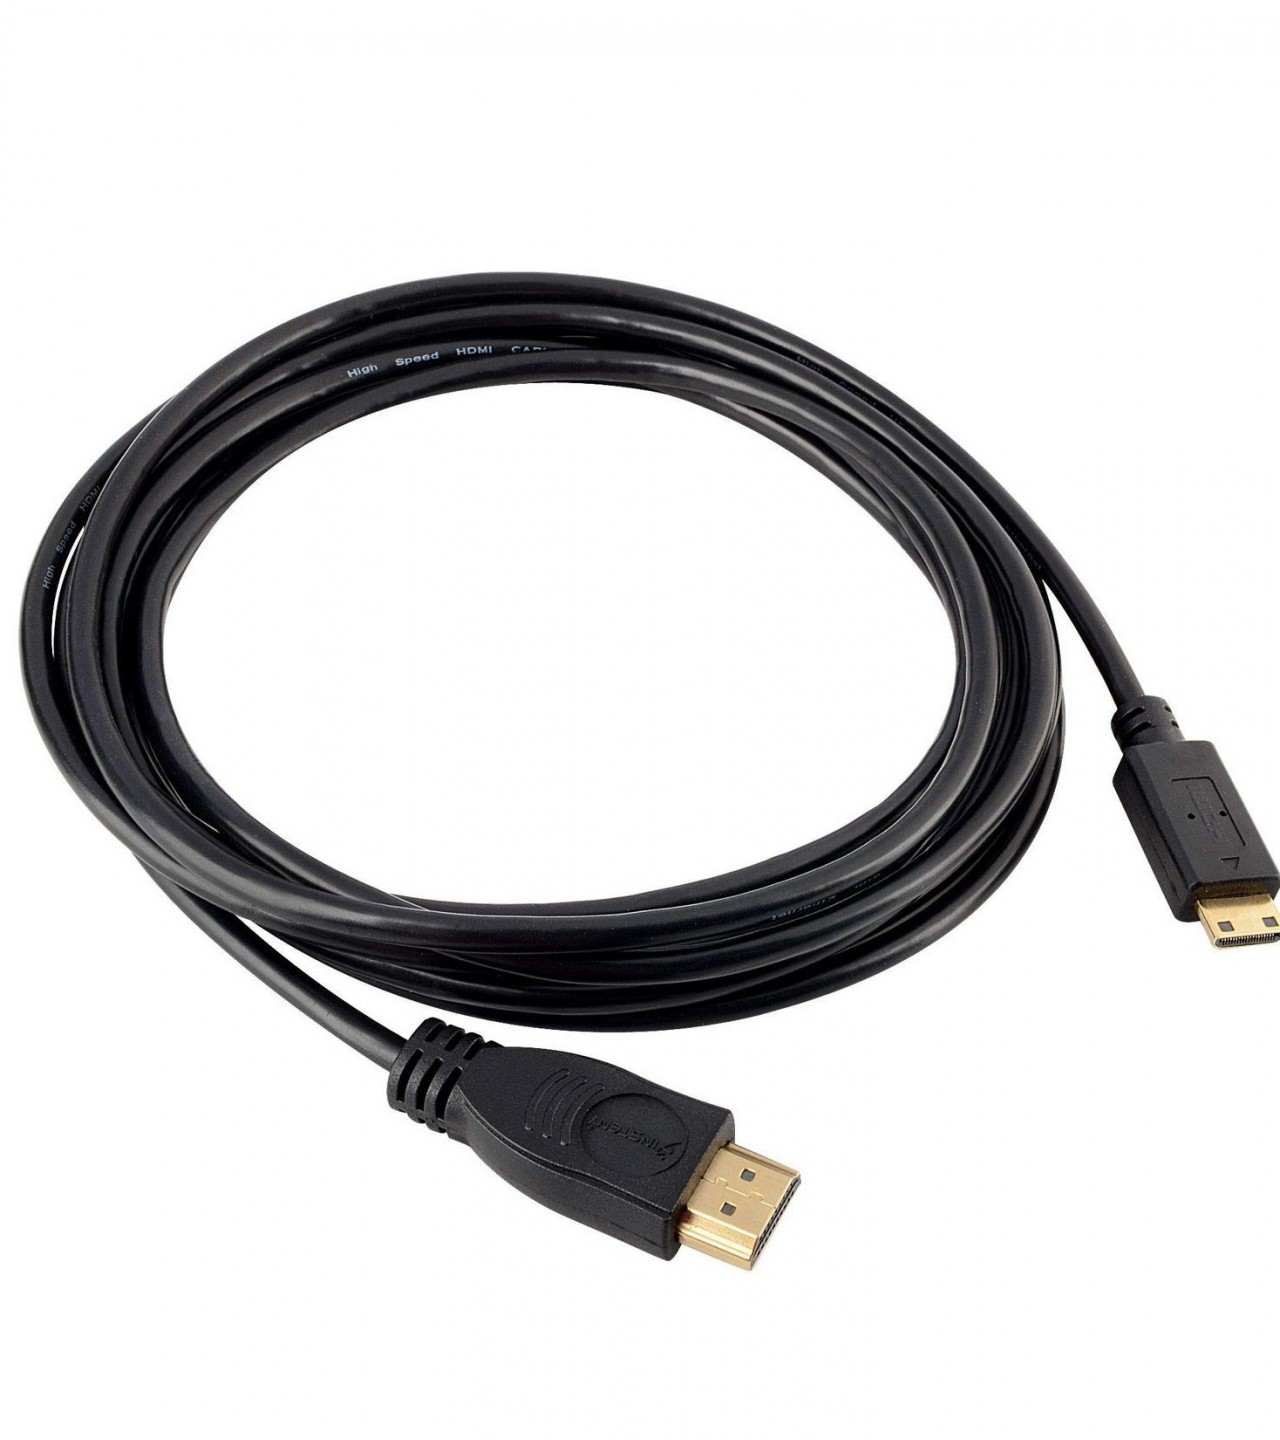 1.8M HDMI to Mini HDMI Cable, M/M for HDTV DV 1080p, High-Speed Mini-HDMI to HDMI TV Adapter Cable